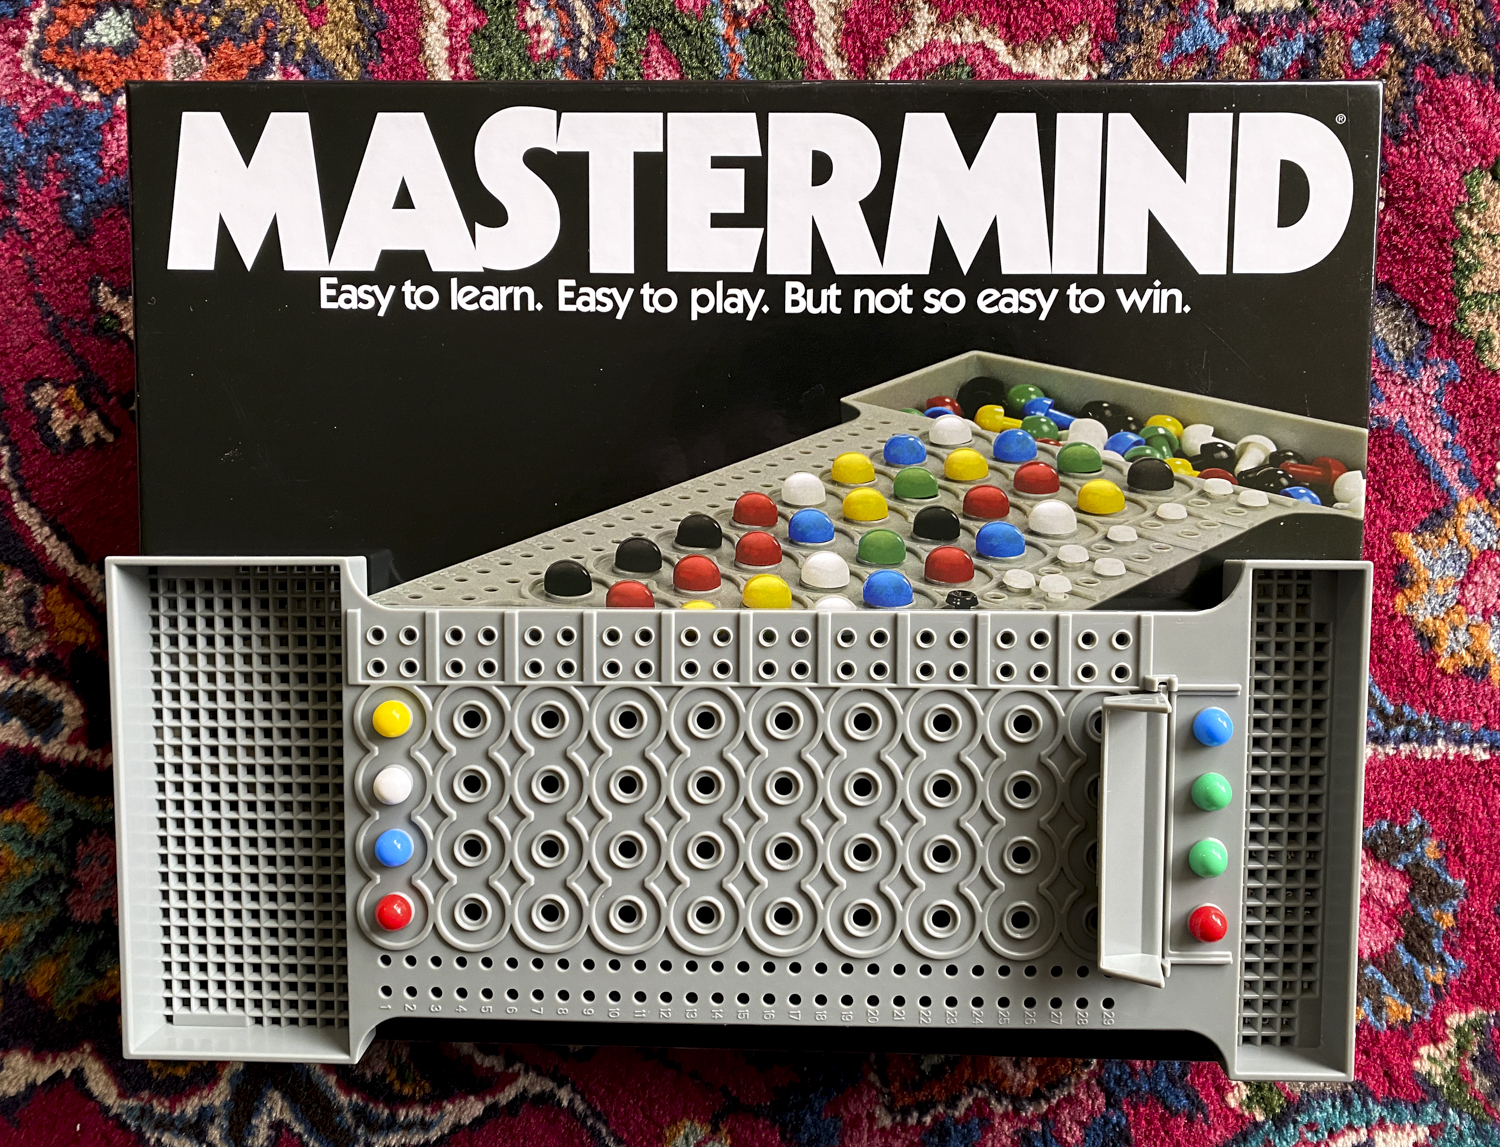 5 Reasons Parents Love the Game Mastermind & Enter to Win!